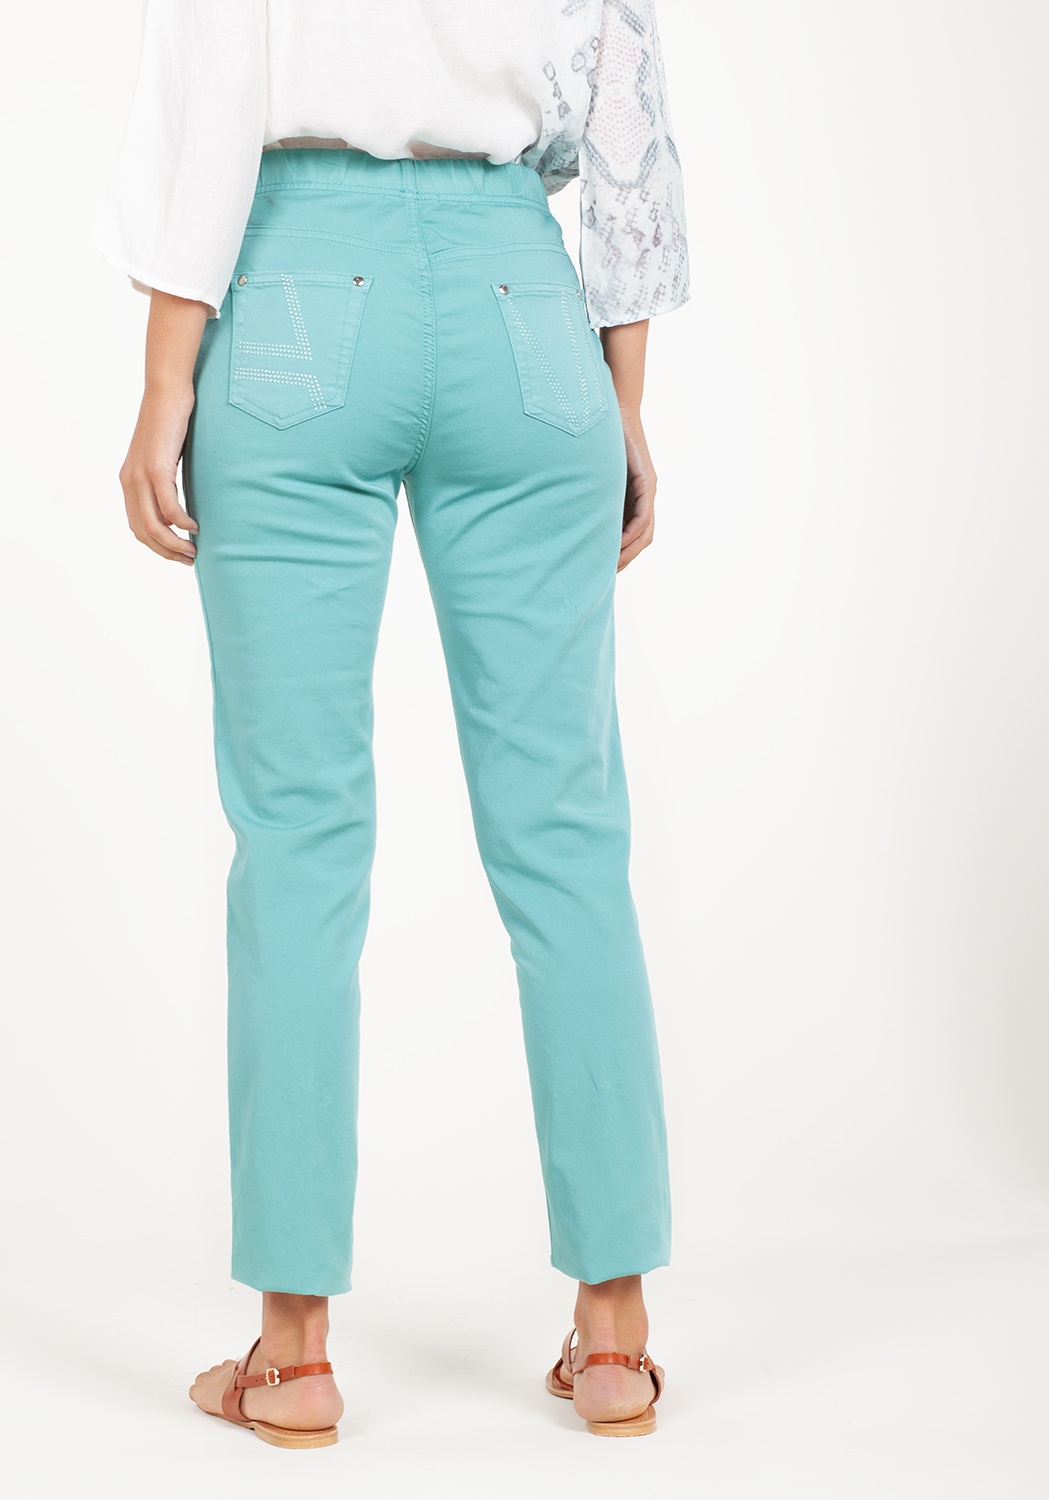 Skinny Turquoise Trousers 3